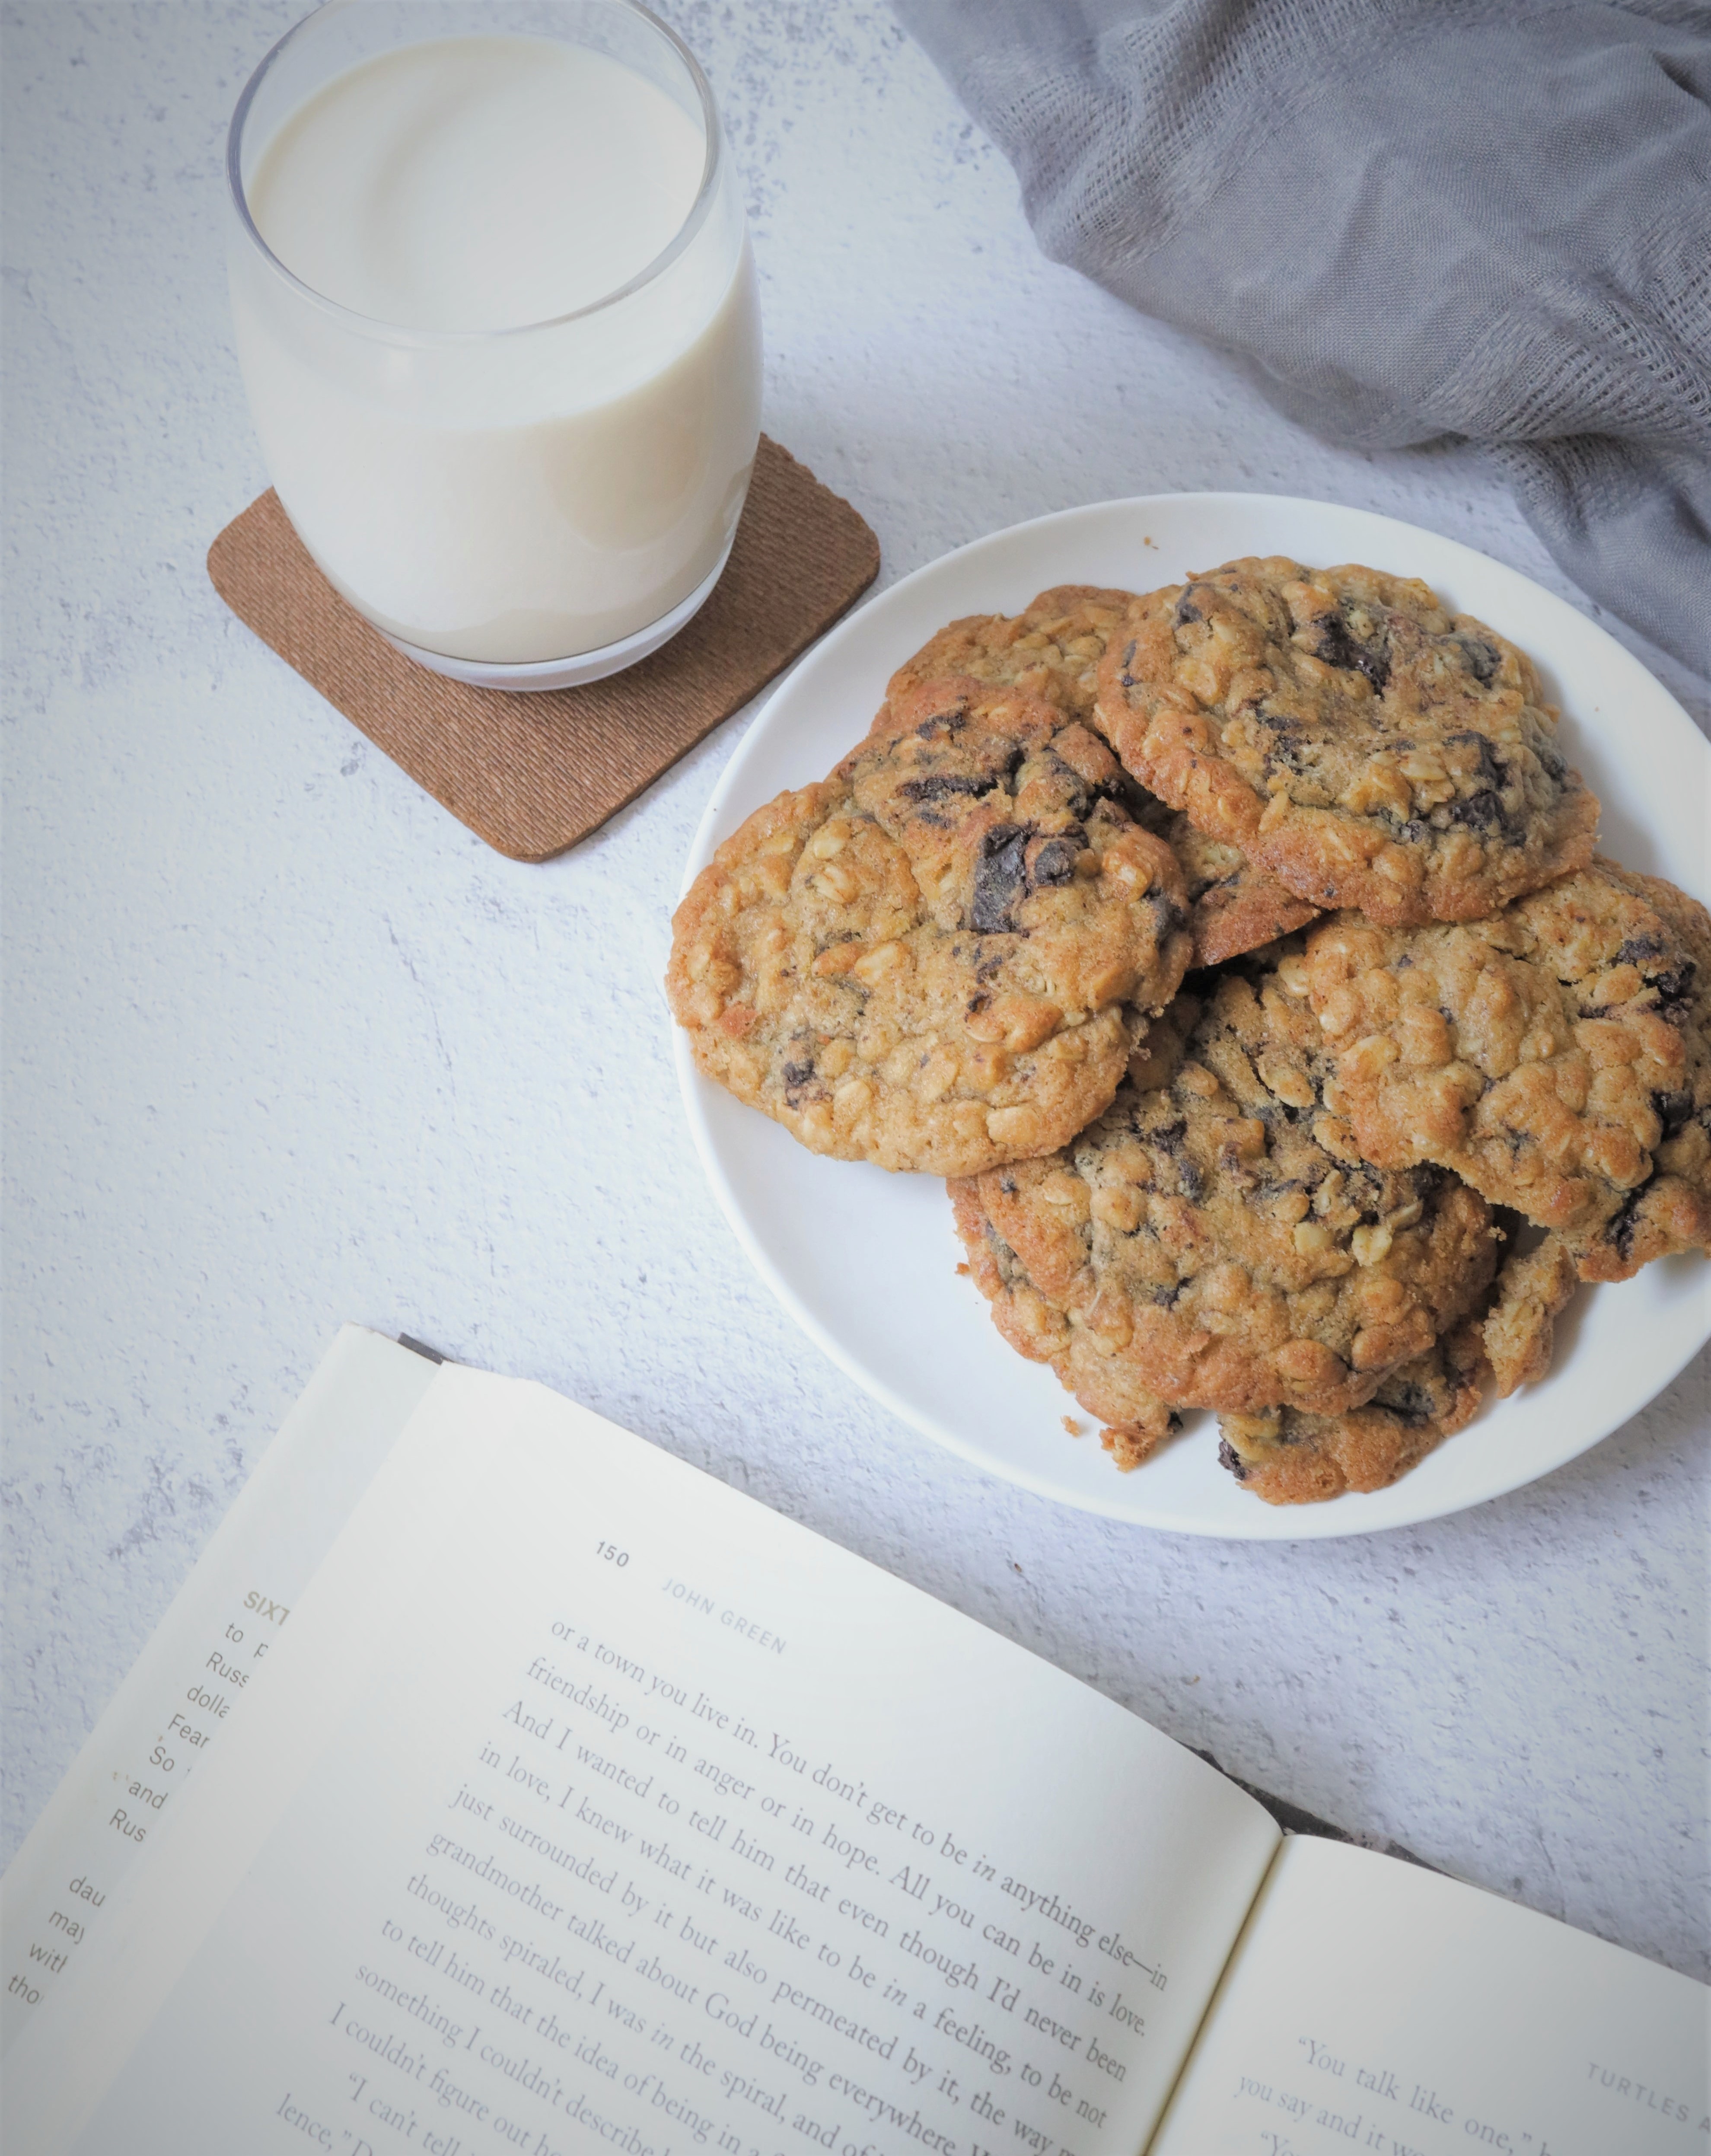 opened book, glass of milk, plate of cookies